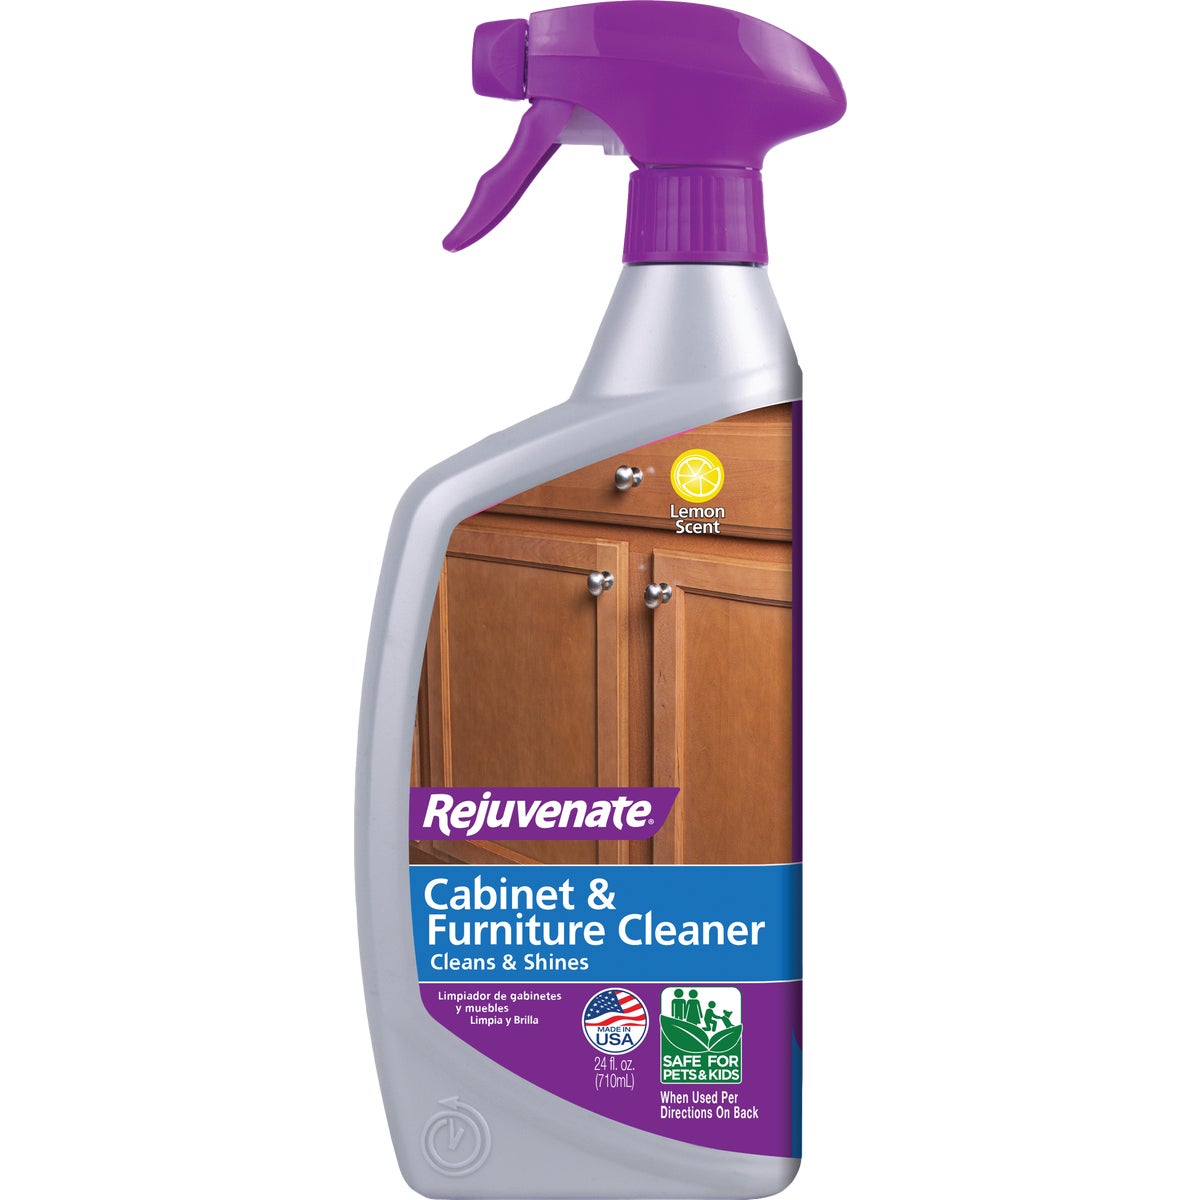 Item 601208, Rejuvenate Cabinet and Furniture Cleaner is how to clean wood cabinets and 